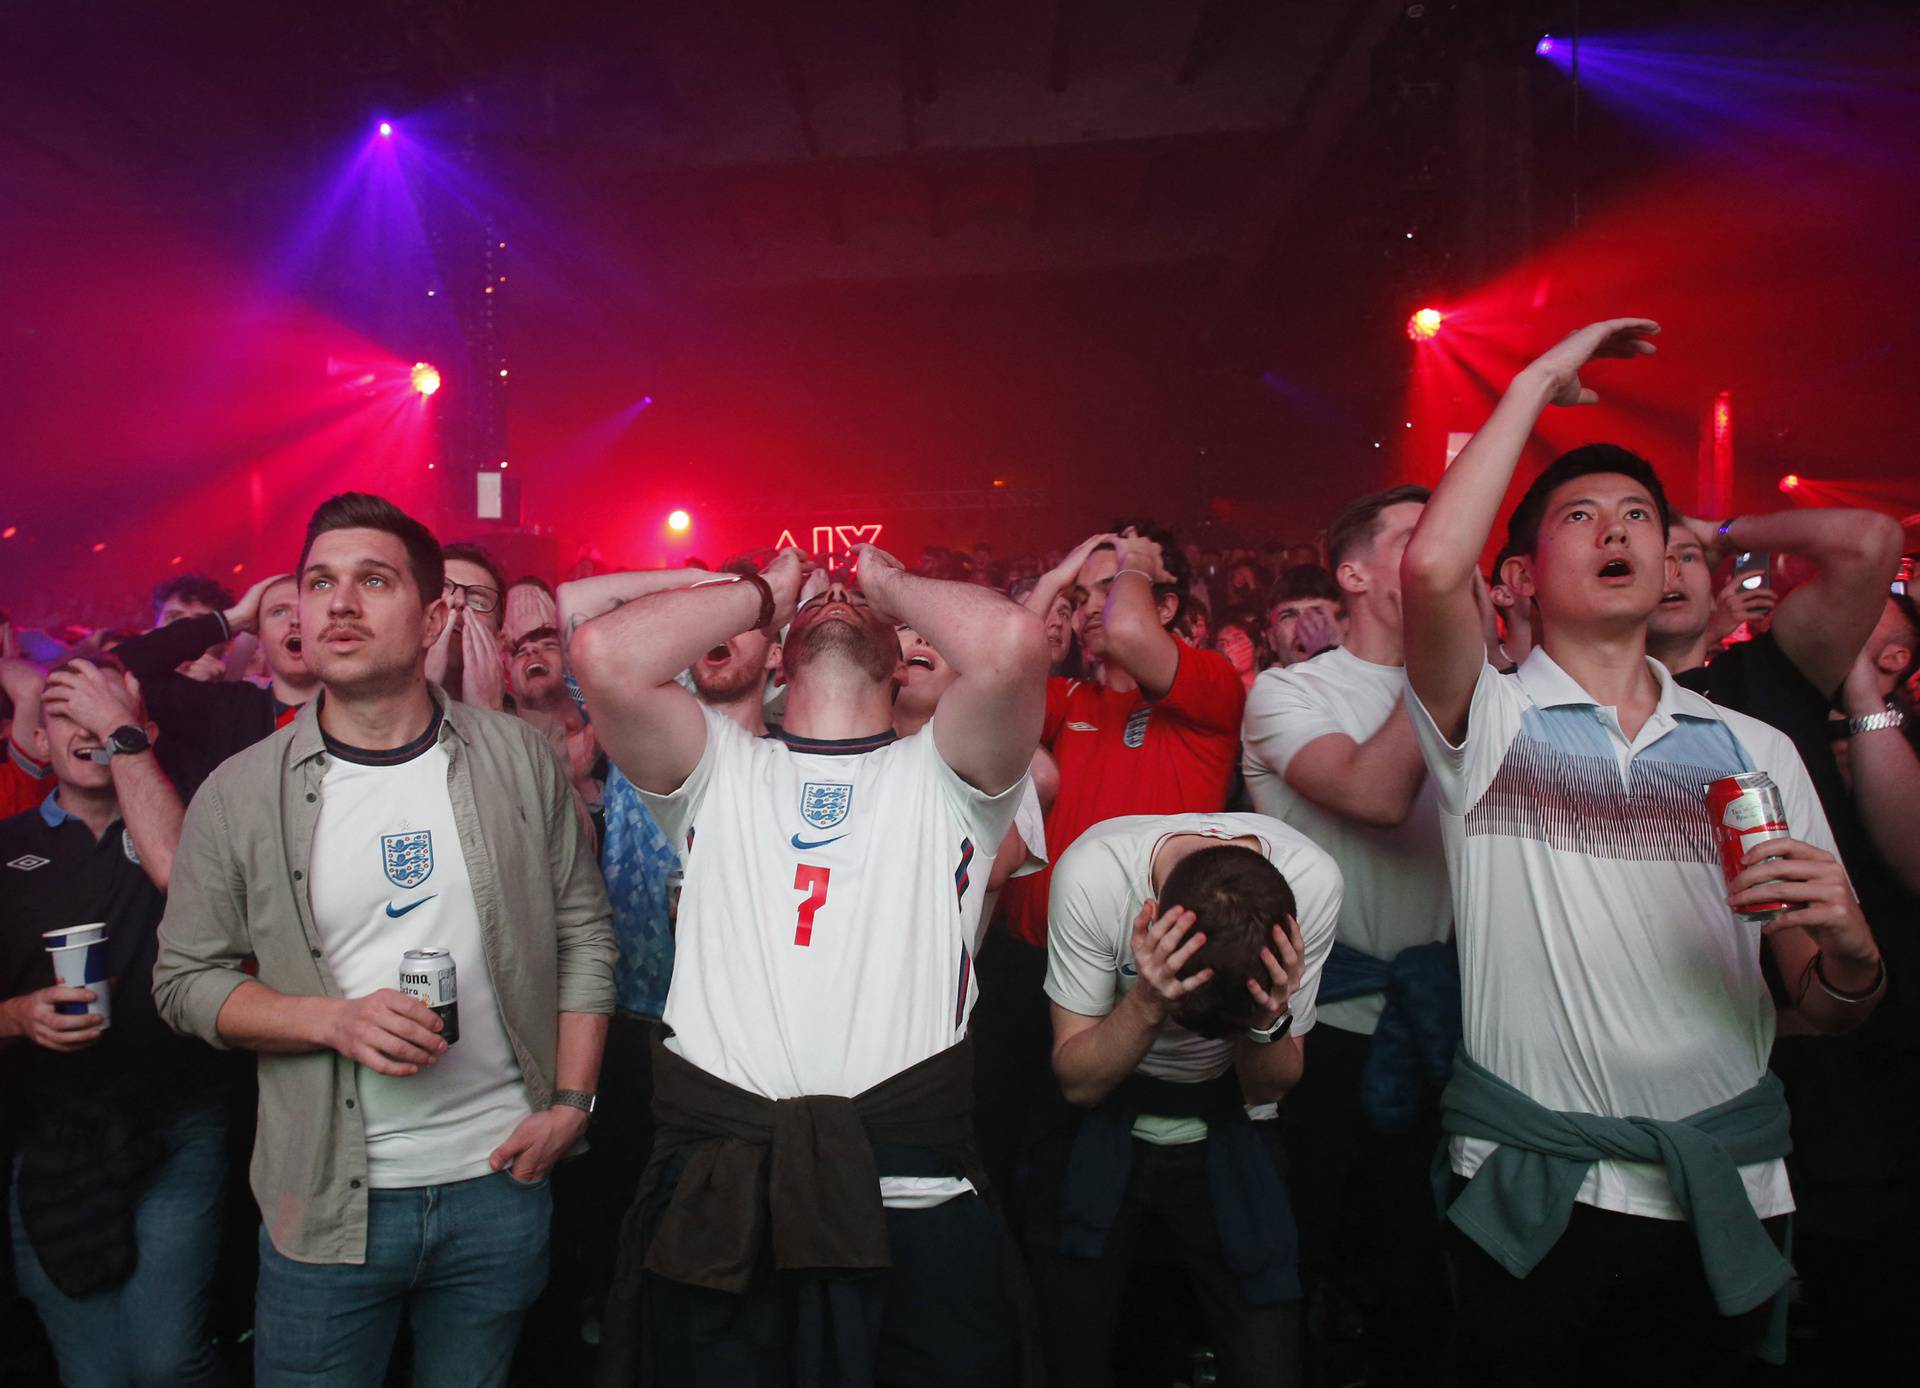 FIFA World Cup Qatar 2022 - Fans in Manchester watch England v United States